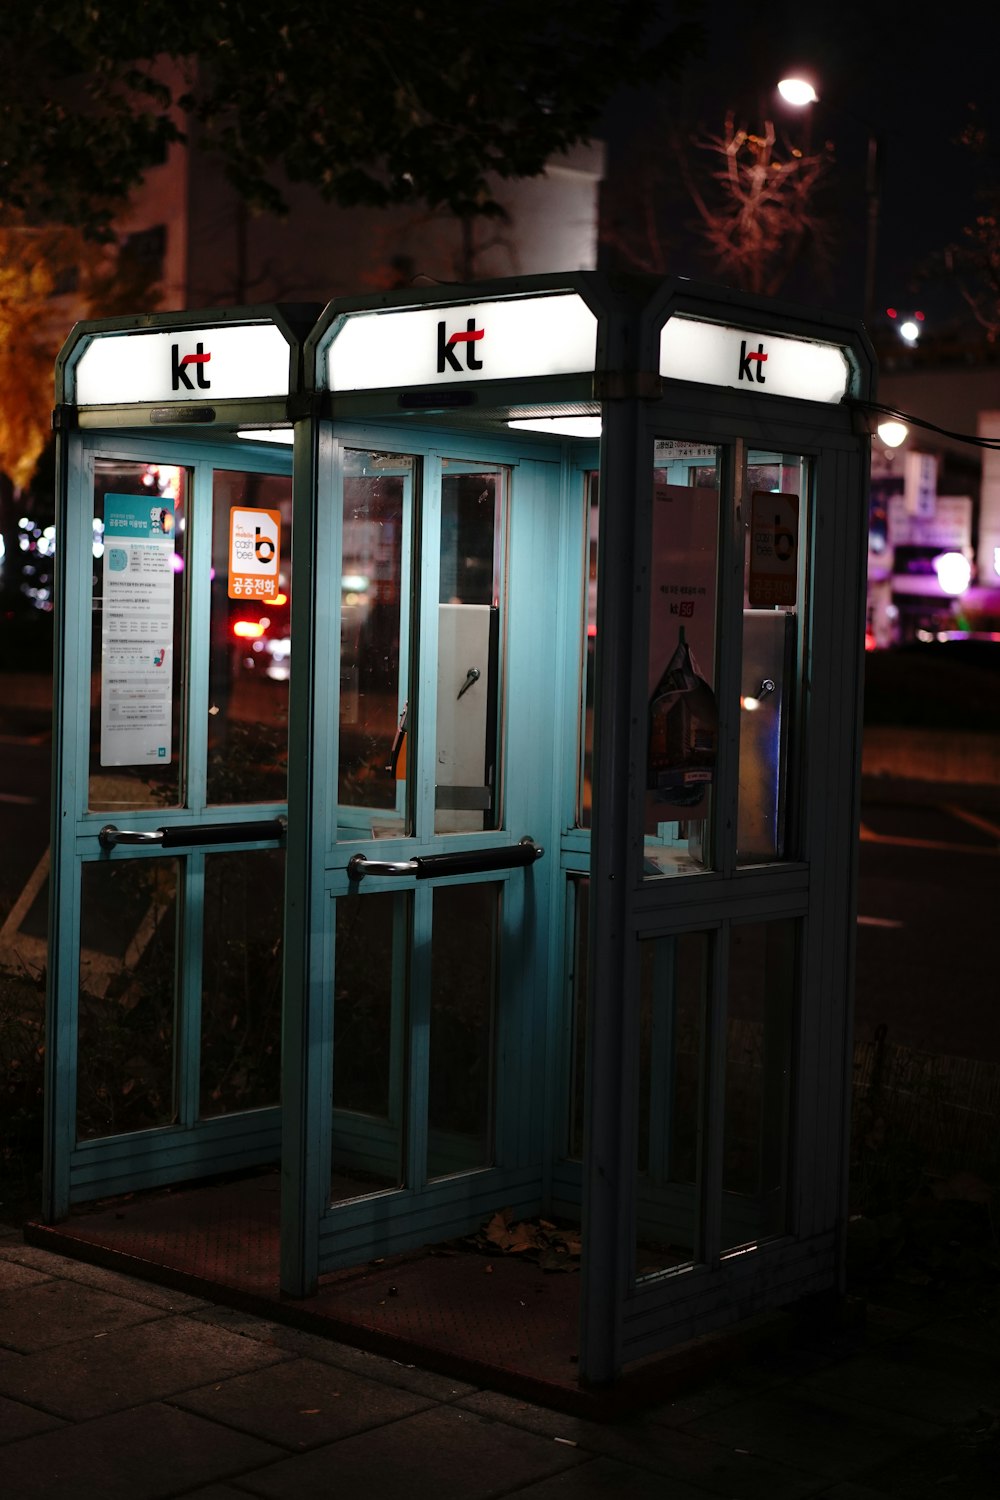 teal telephone booth